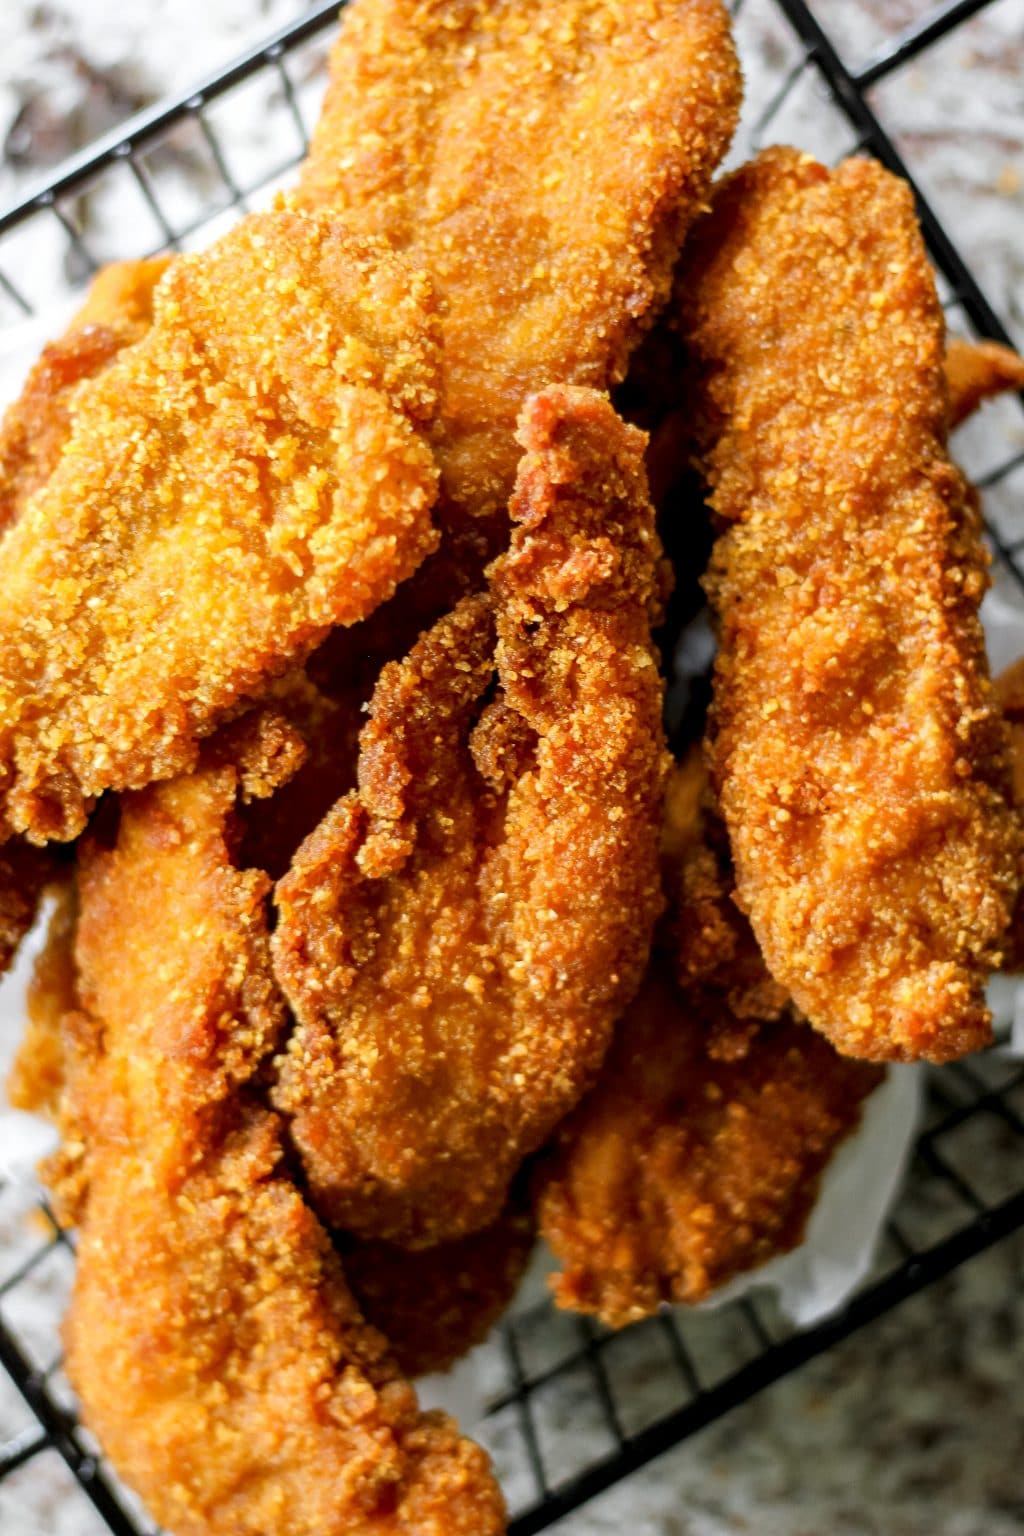 Double-Coated Cornflake Crumb Fried Chicken - The Seasoned Skillet